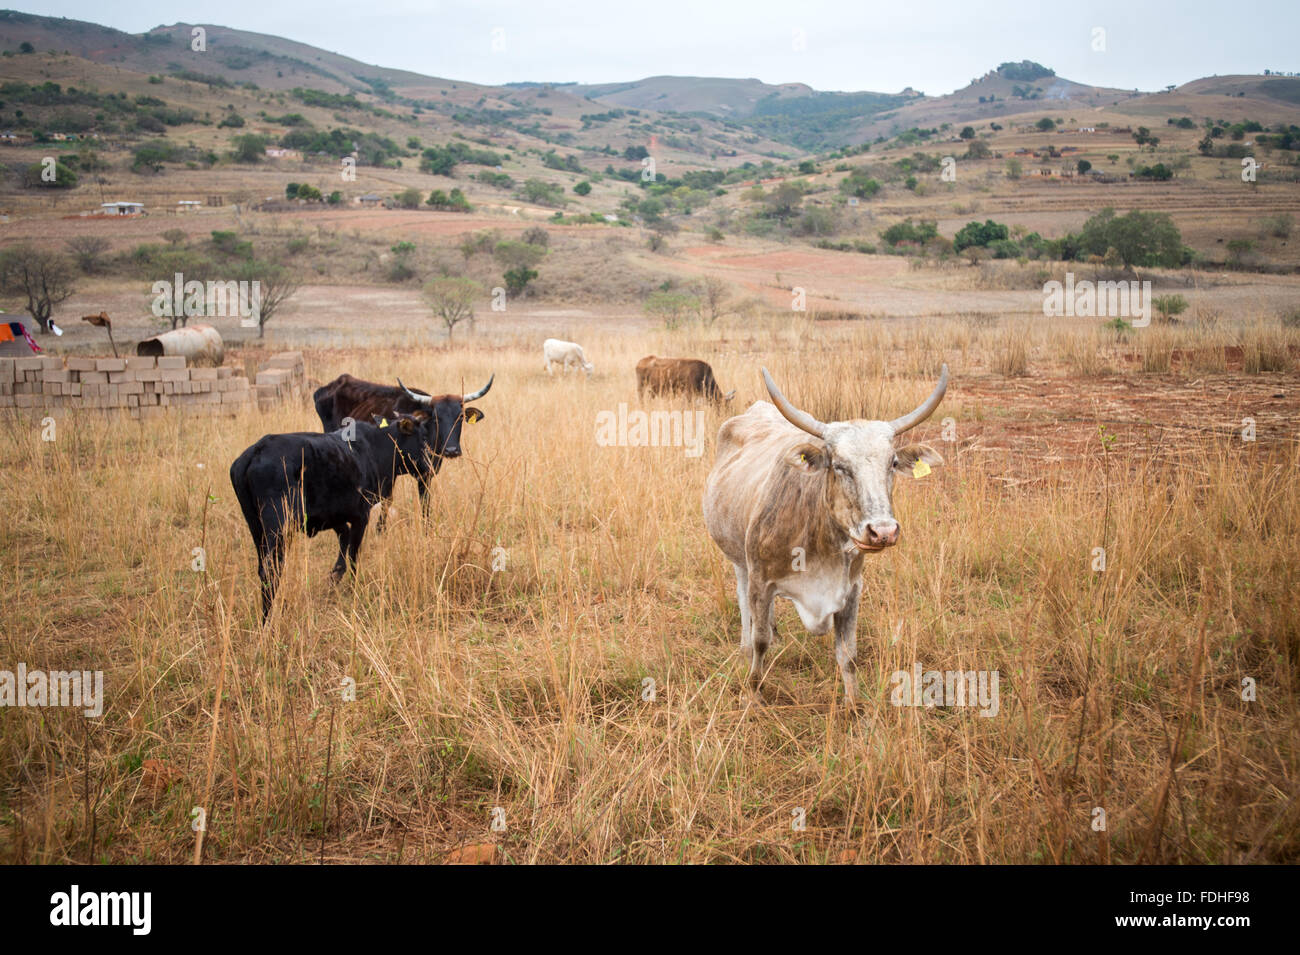 Cattle grazing on a farm in the Hhohho region of Swaziland, Africa. Stock Photo